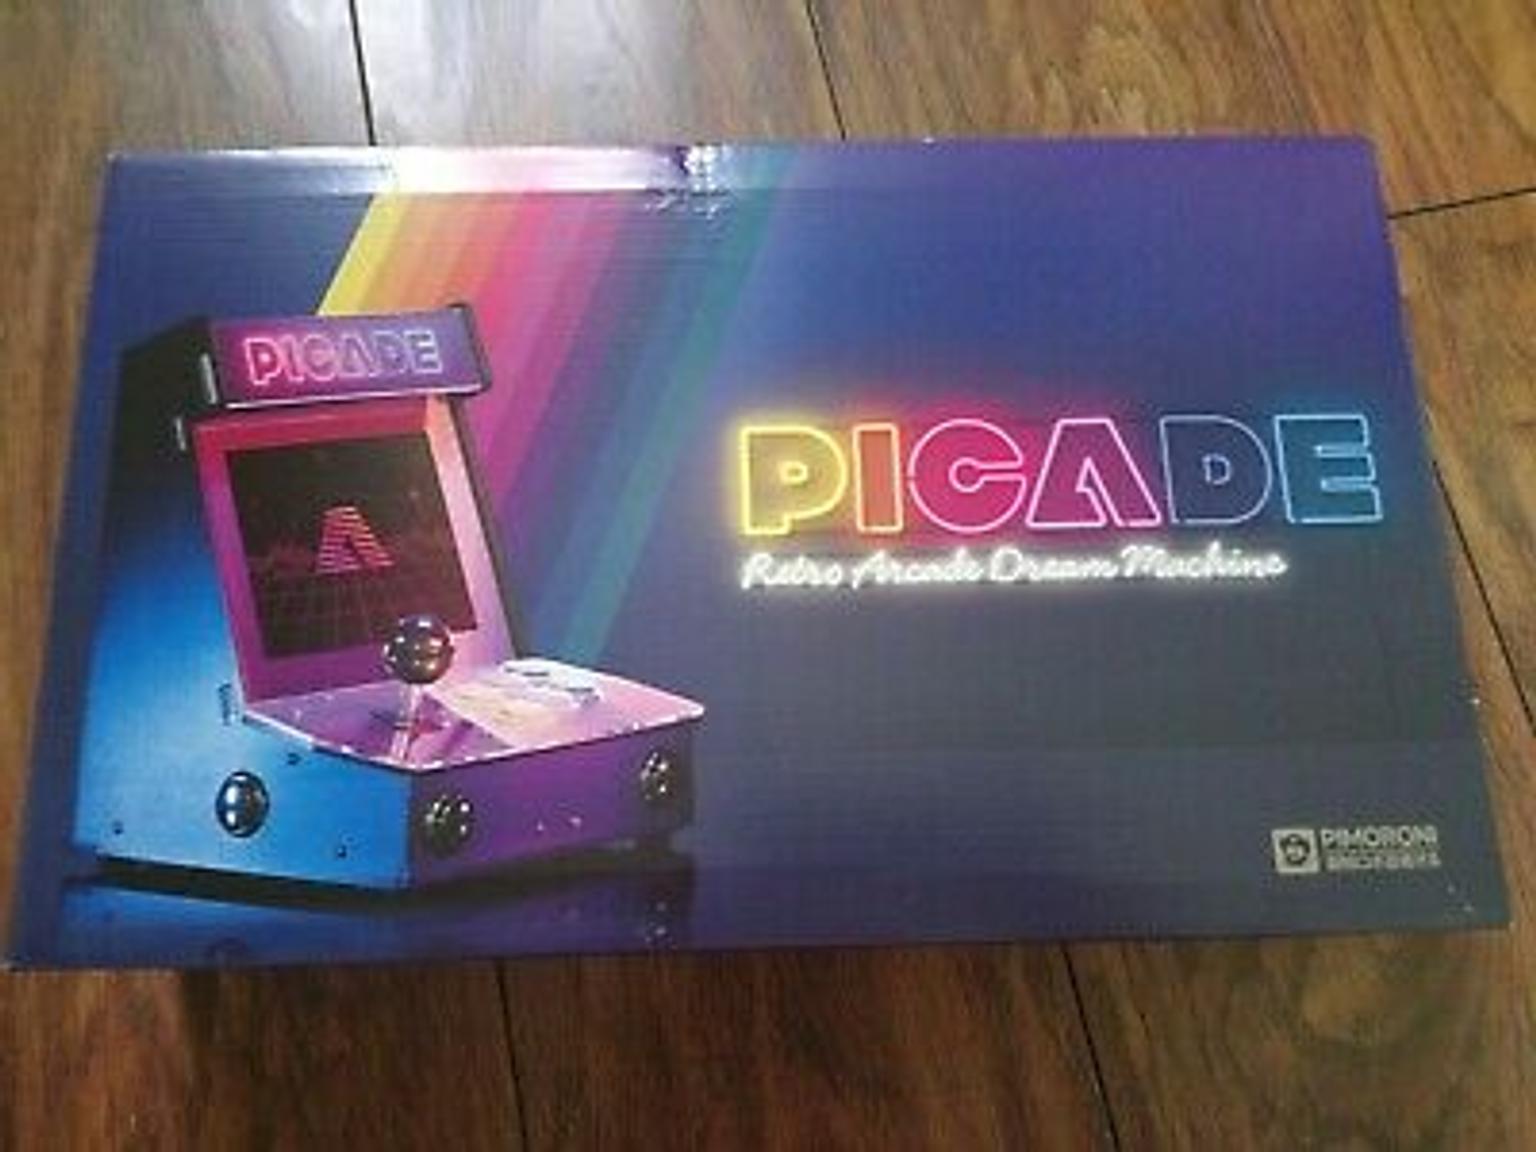 Picade Diy Mini Arcade Machine Kit In B63 Dudley For 120 00 For